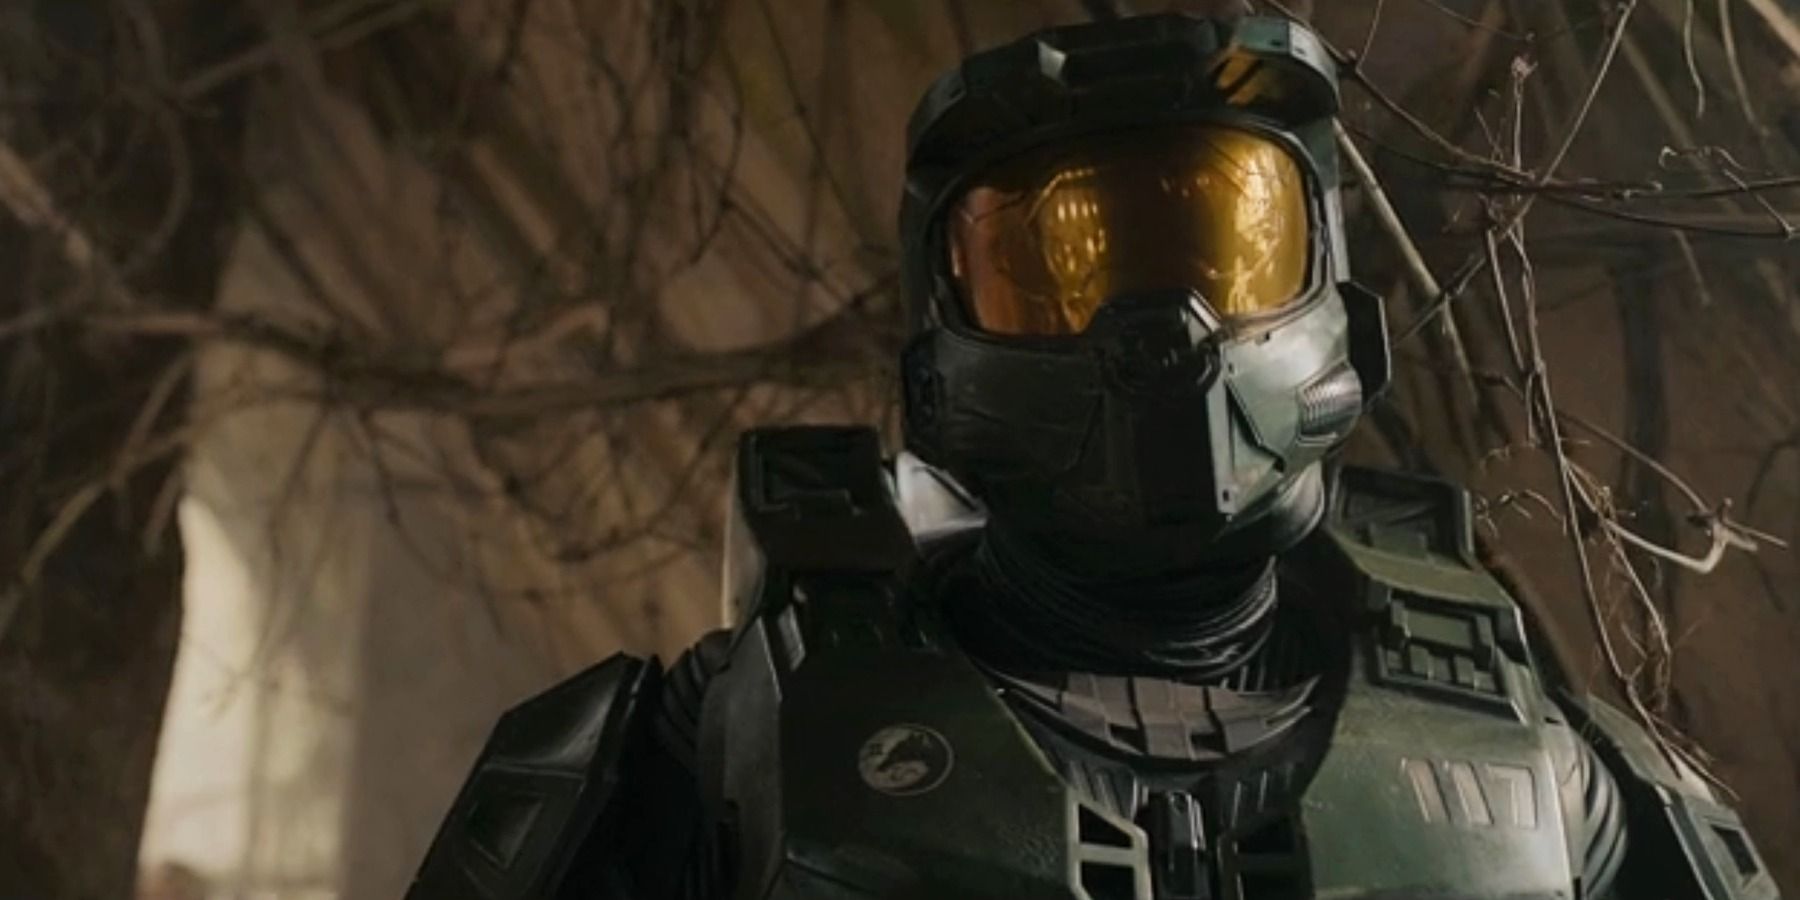 Halo Series Teases Its Big Clash With The Covenant In New Preview